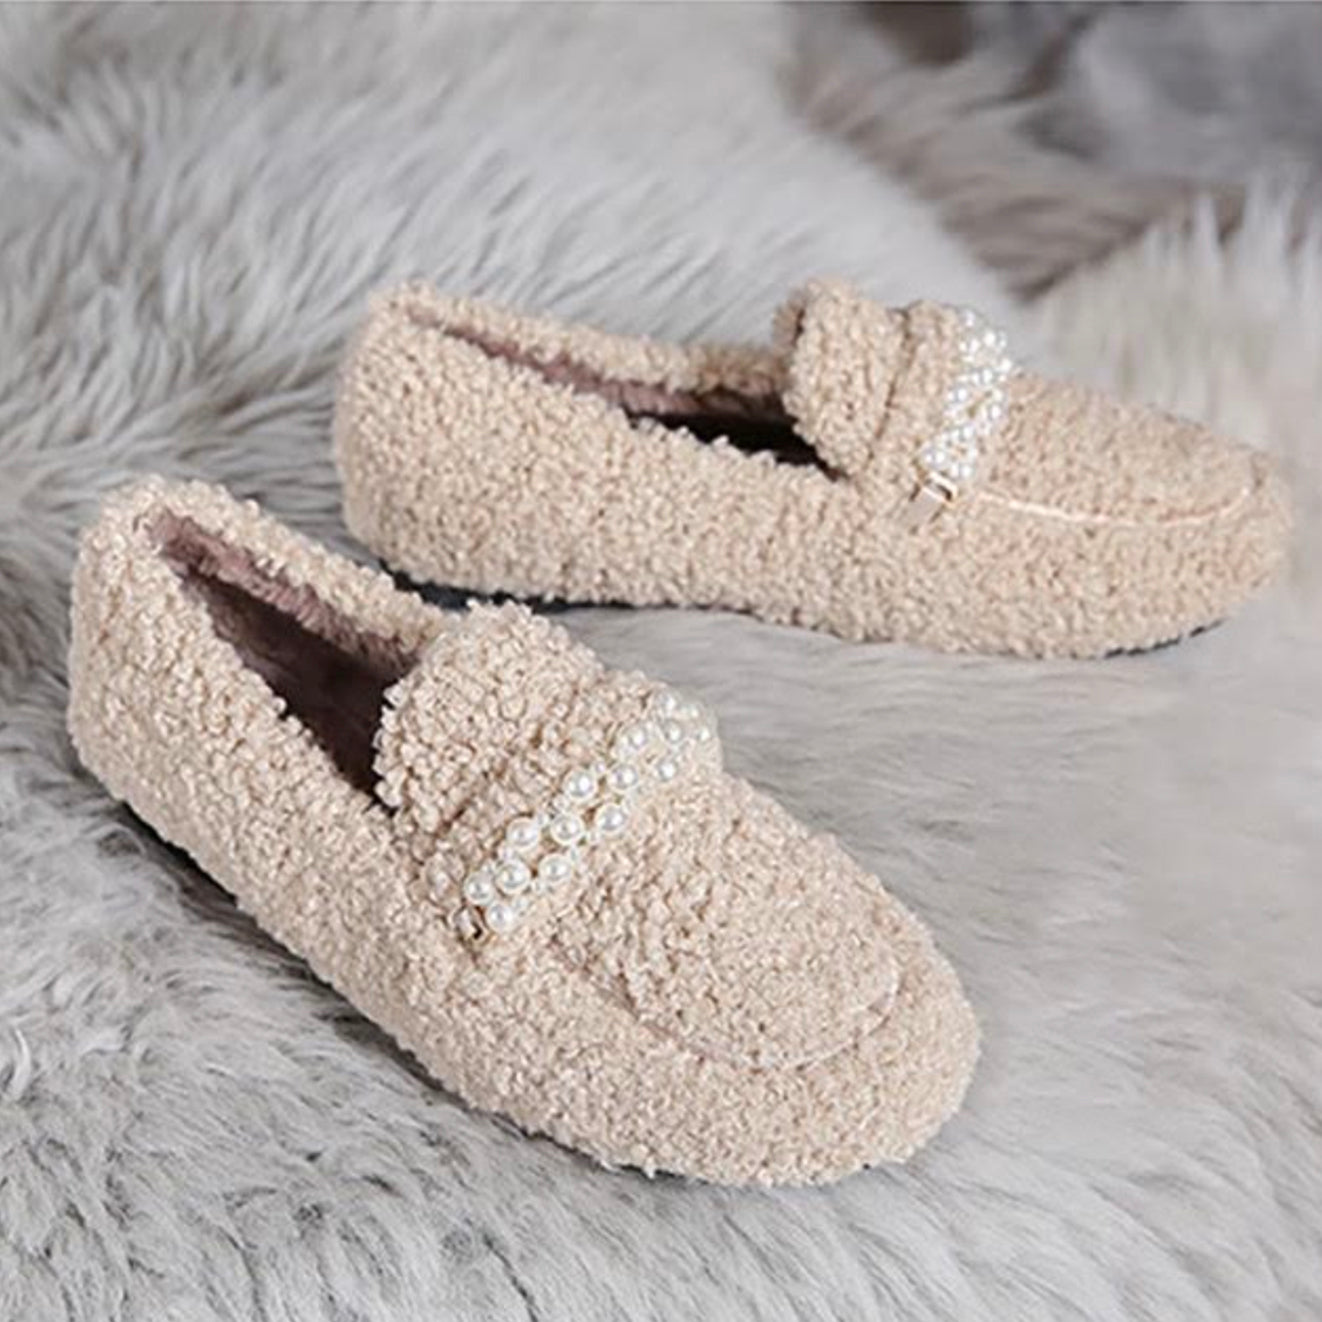 The Pearls Beige Mocassins